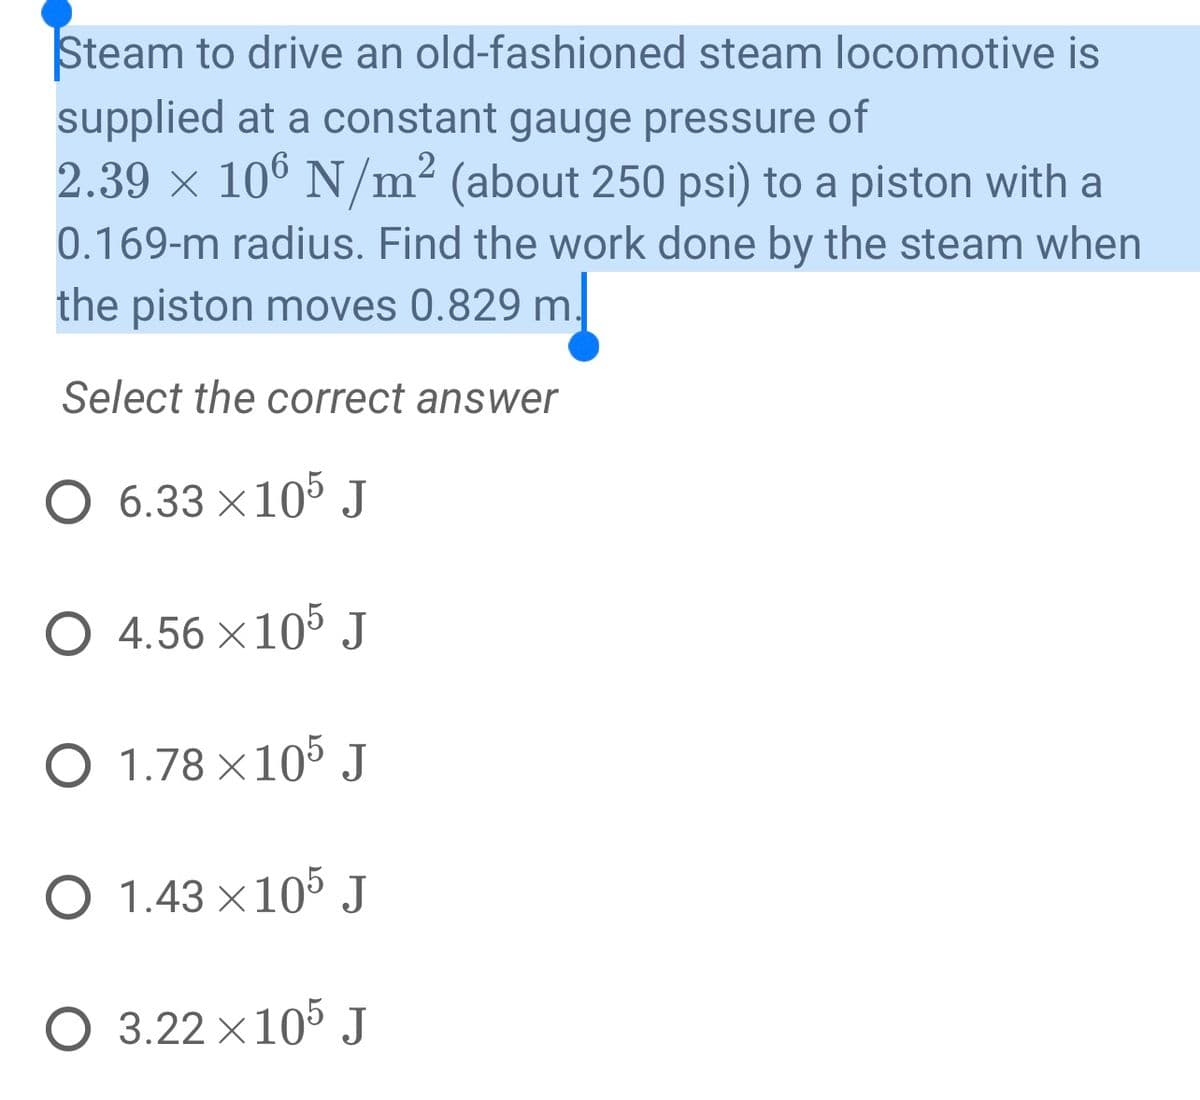 Steam to drive an old-fashioned steam locomotive is
supplied at a constant gauge pressure of
2.39 × 106 N/m² (about 250 psi) to a piston with a
0.169-m radius. Find the work done by the steam when
the piston moves 0.829 m.
Select the correct answer
O 6.33 × 105 J
O 4.56×105 J
O 1.78 × 105 J
O 1.43 × 105 J
O 3.22×105 J